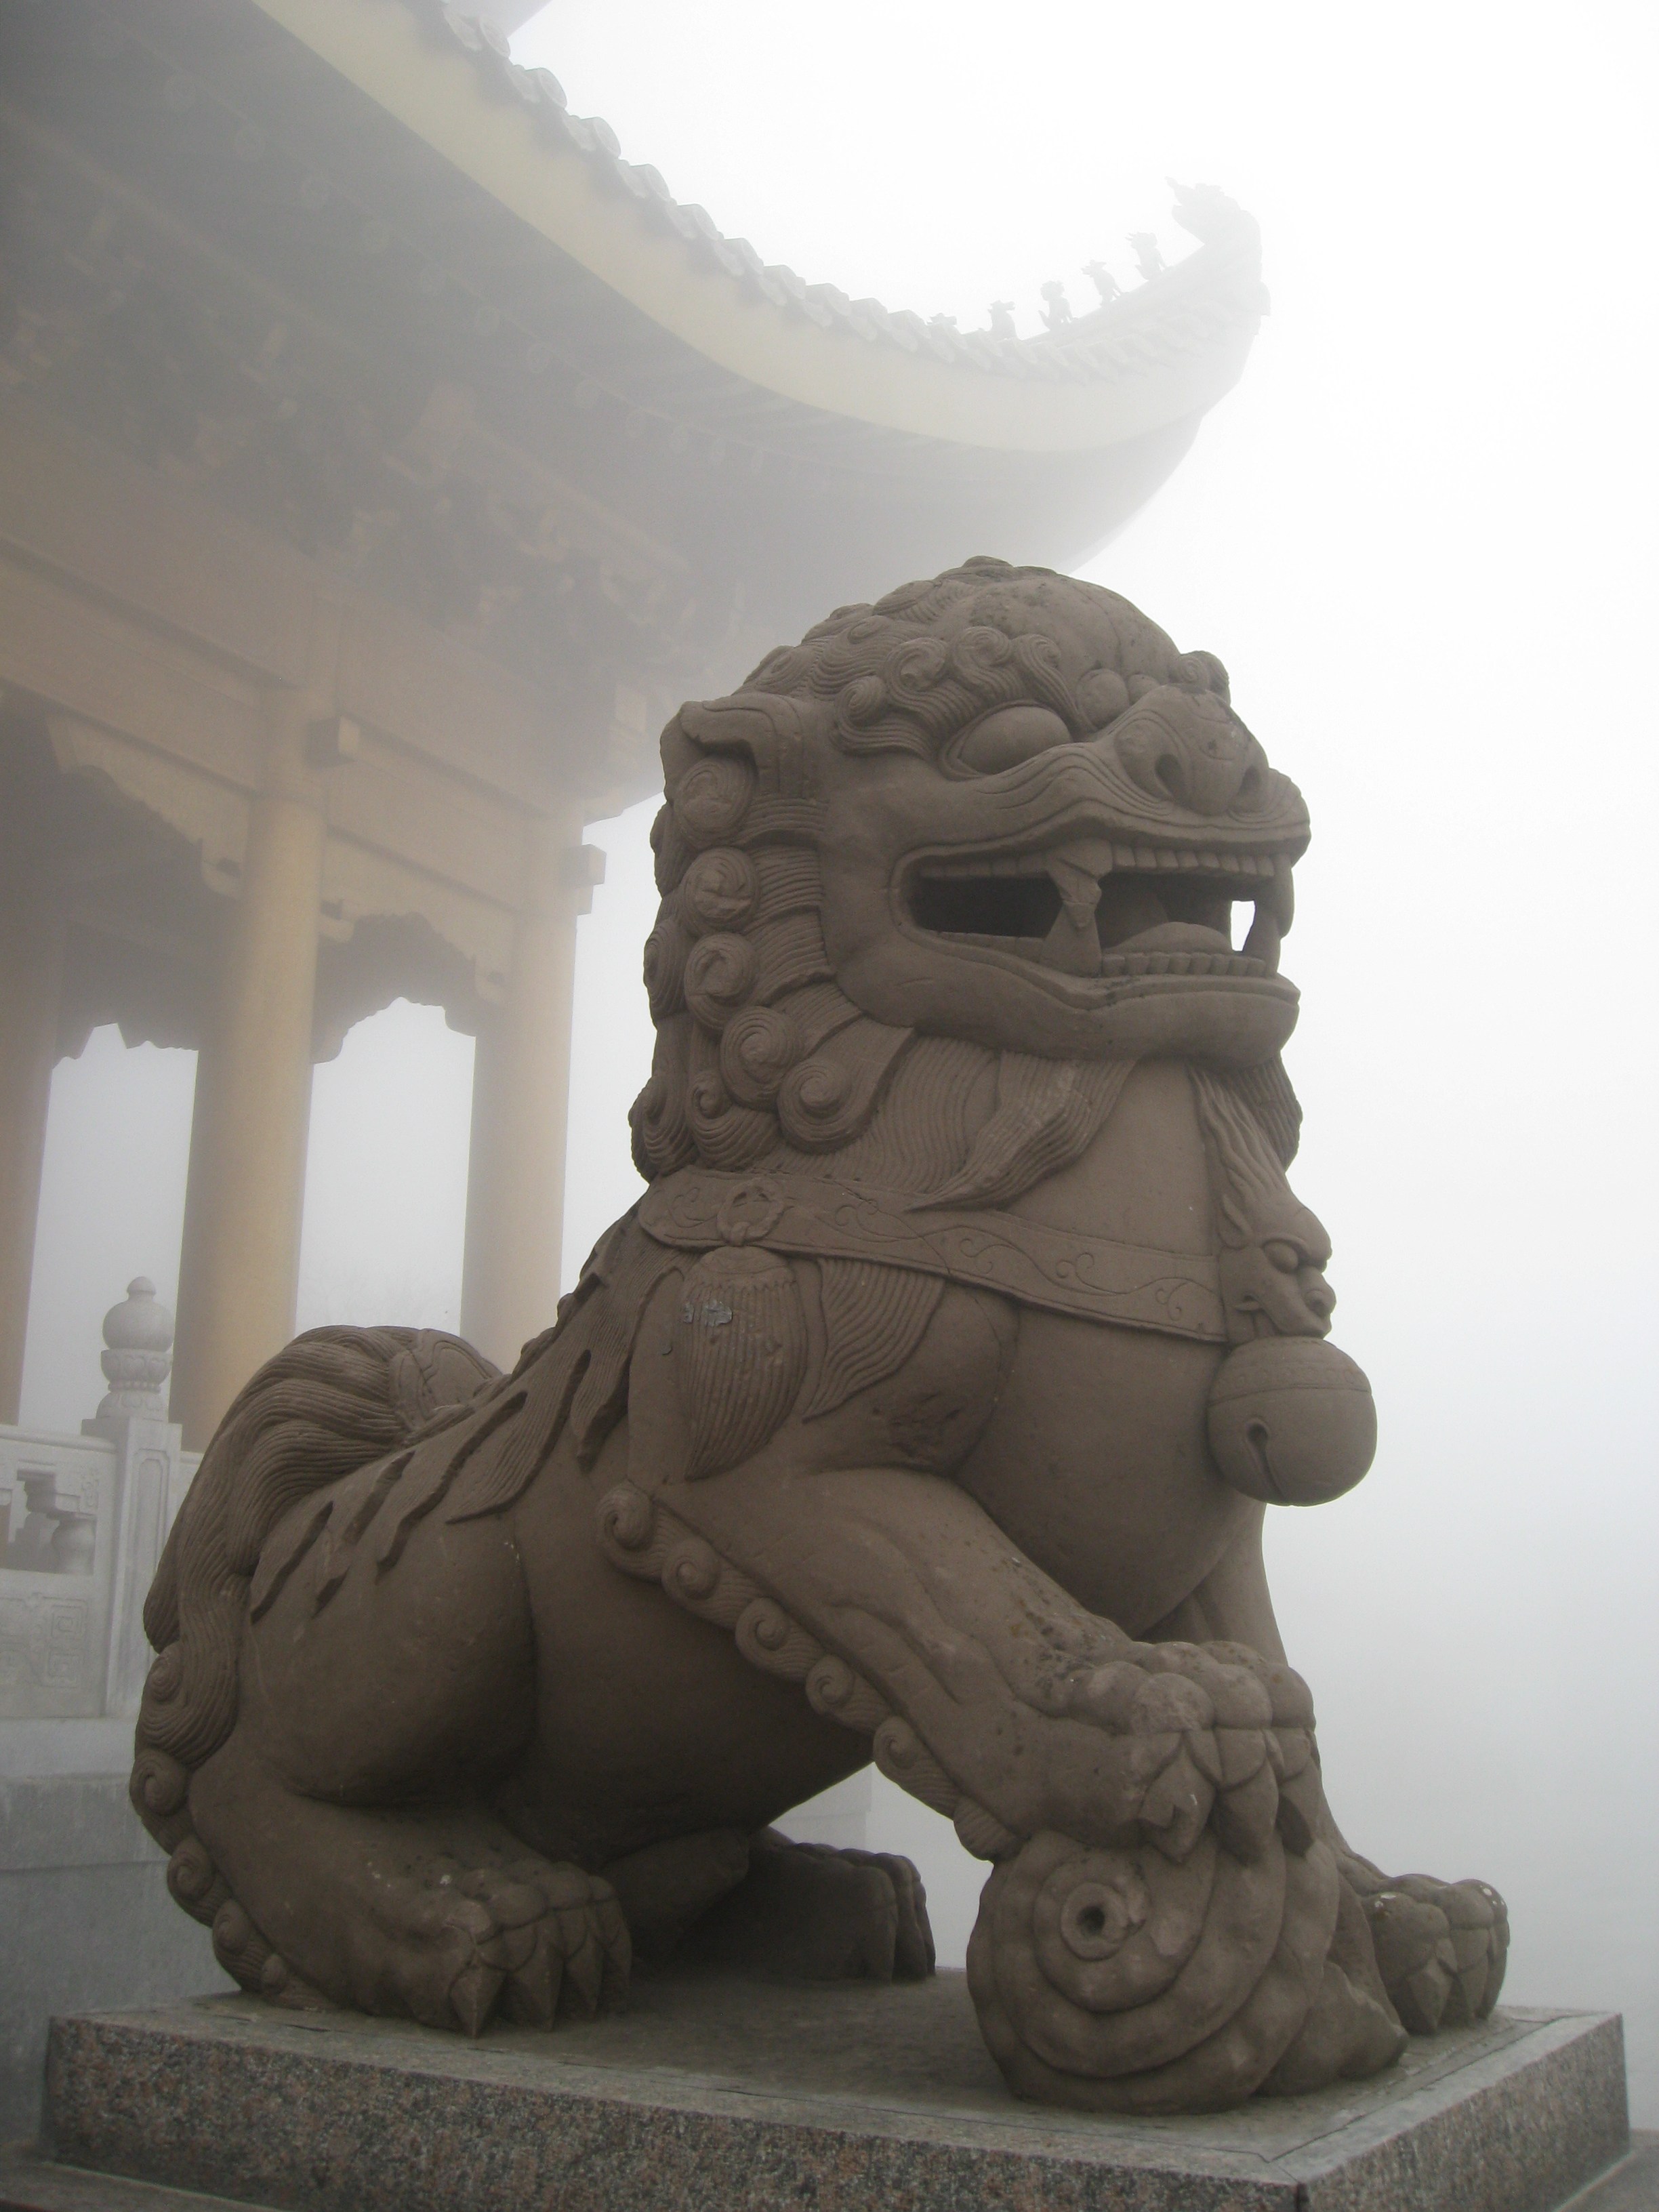 Free photo: Chinese Lion Sculpture - Architecture, Lion, Stone - Free